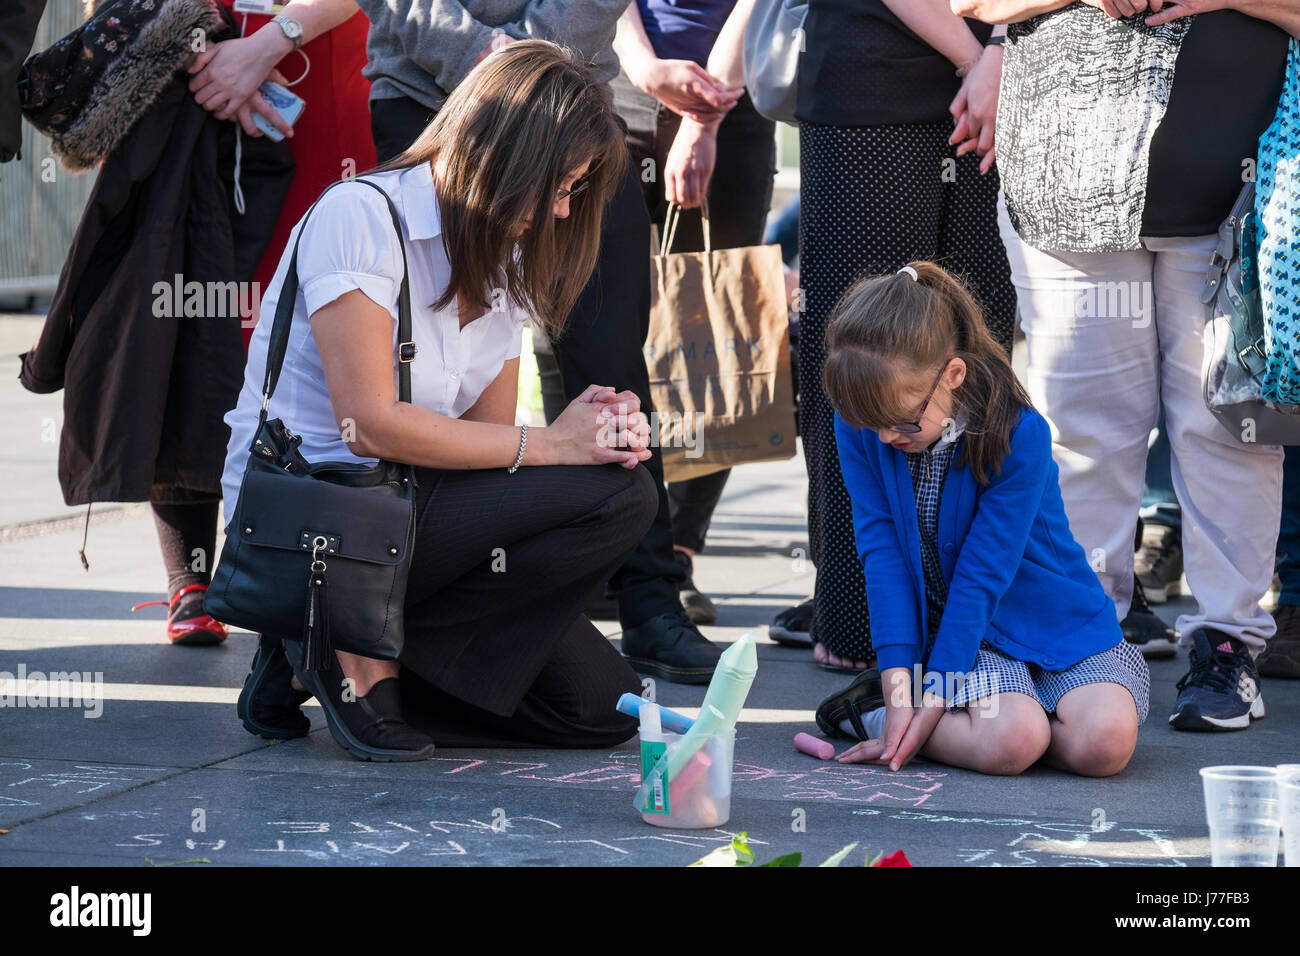 Liverpool, UK. 23rd May, 2017. Around 150 people attended a vigil in Liverpool on Tuesday March 23, 2017 to remember the victims of the terrorist attack which took place at the Manchester Arena following a concert last night in which 22 people where killed. Credit: Christopher Middleton/Alamy Live News Stock Photo